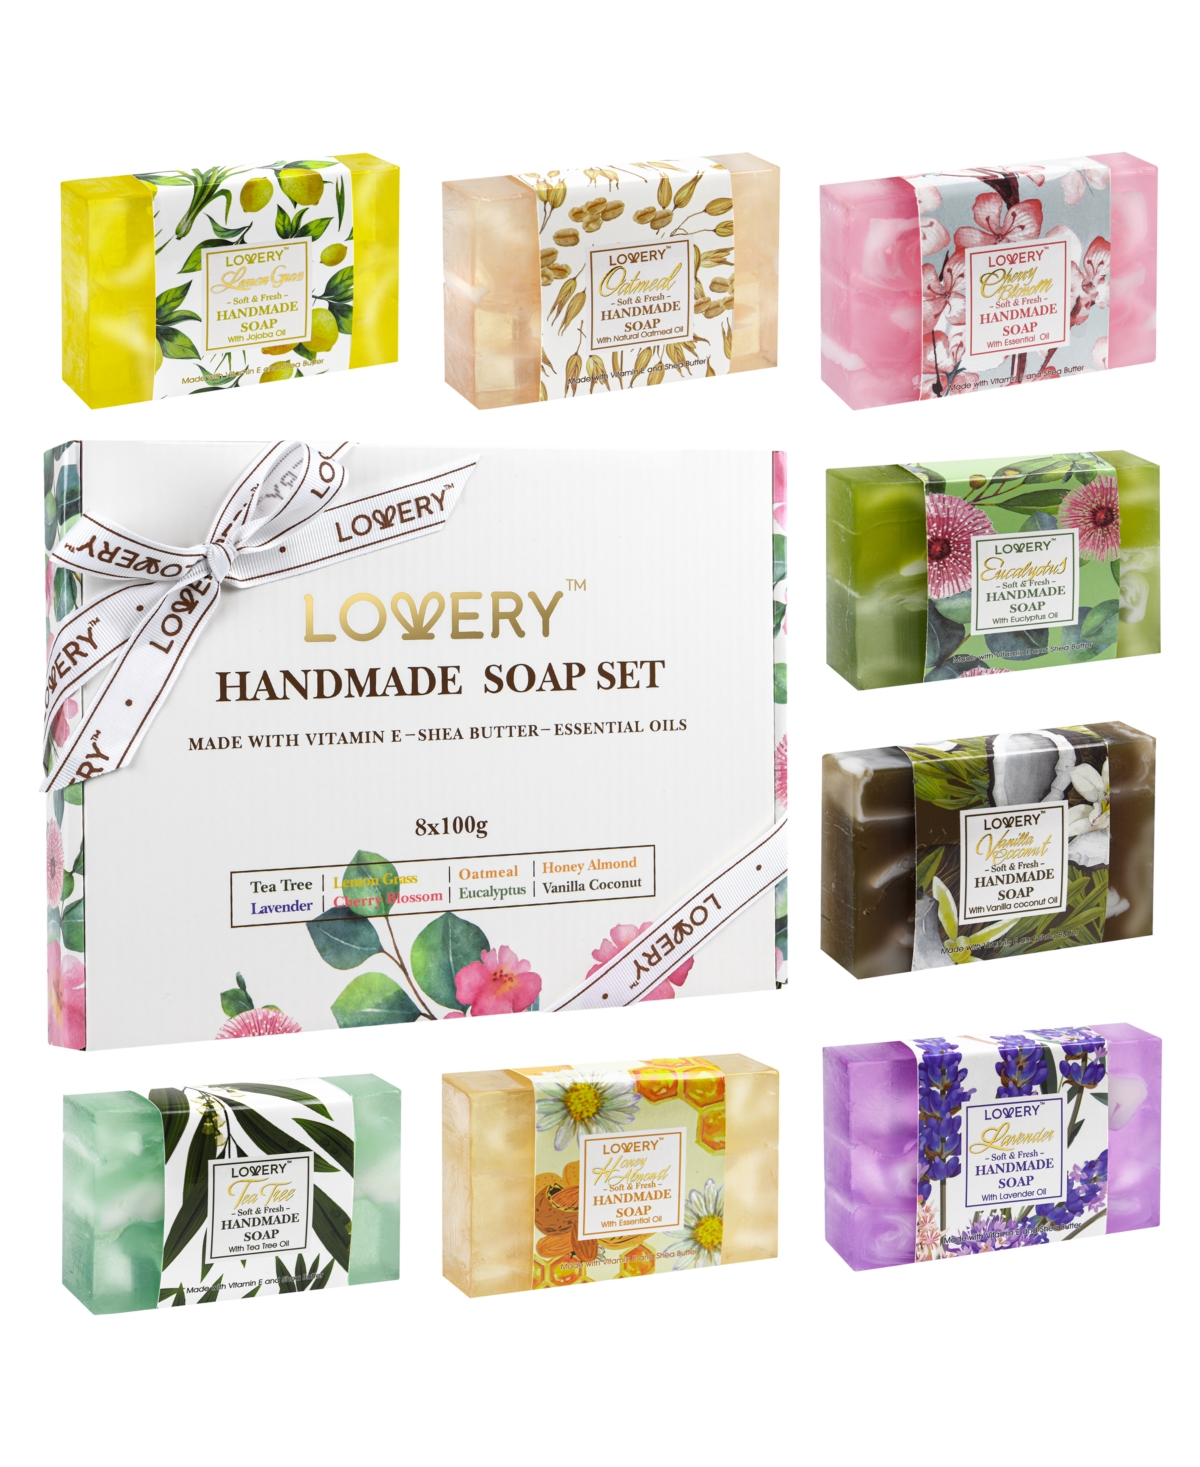 Lovery Handmade Soap Gift Set, Variety Pack Bath and Body Care Gift Set, 8  Piece & Reviews - Bath & Body - Beauty - Macy's